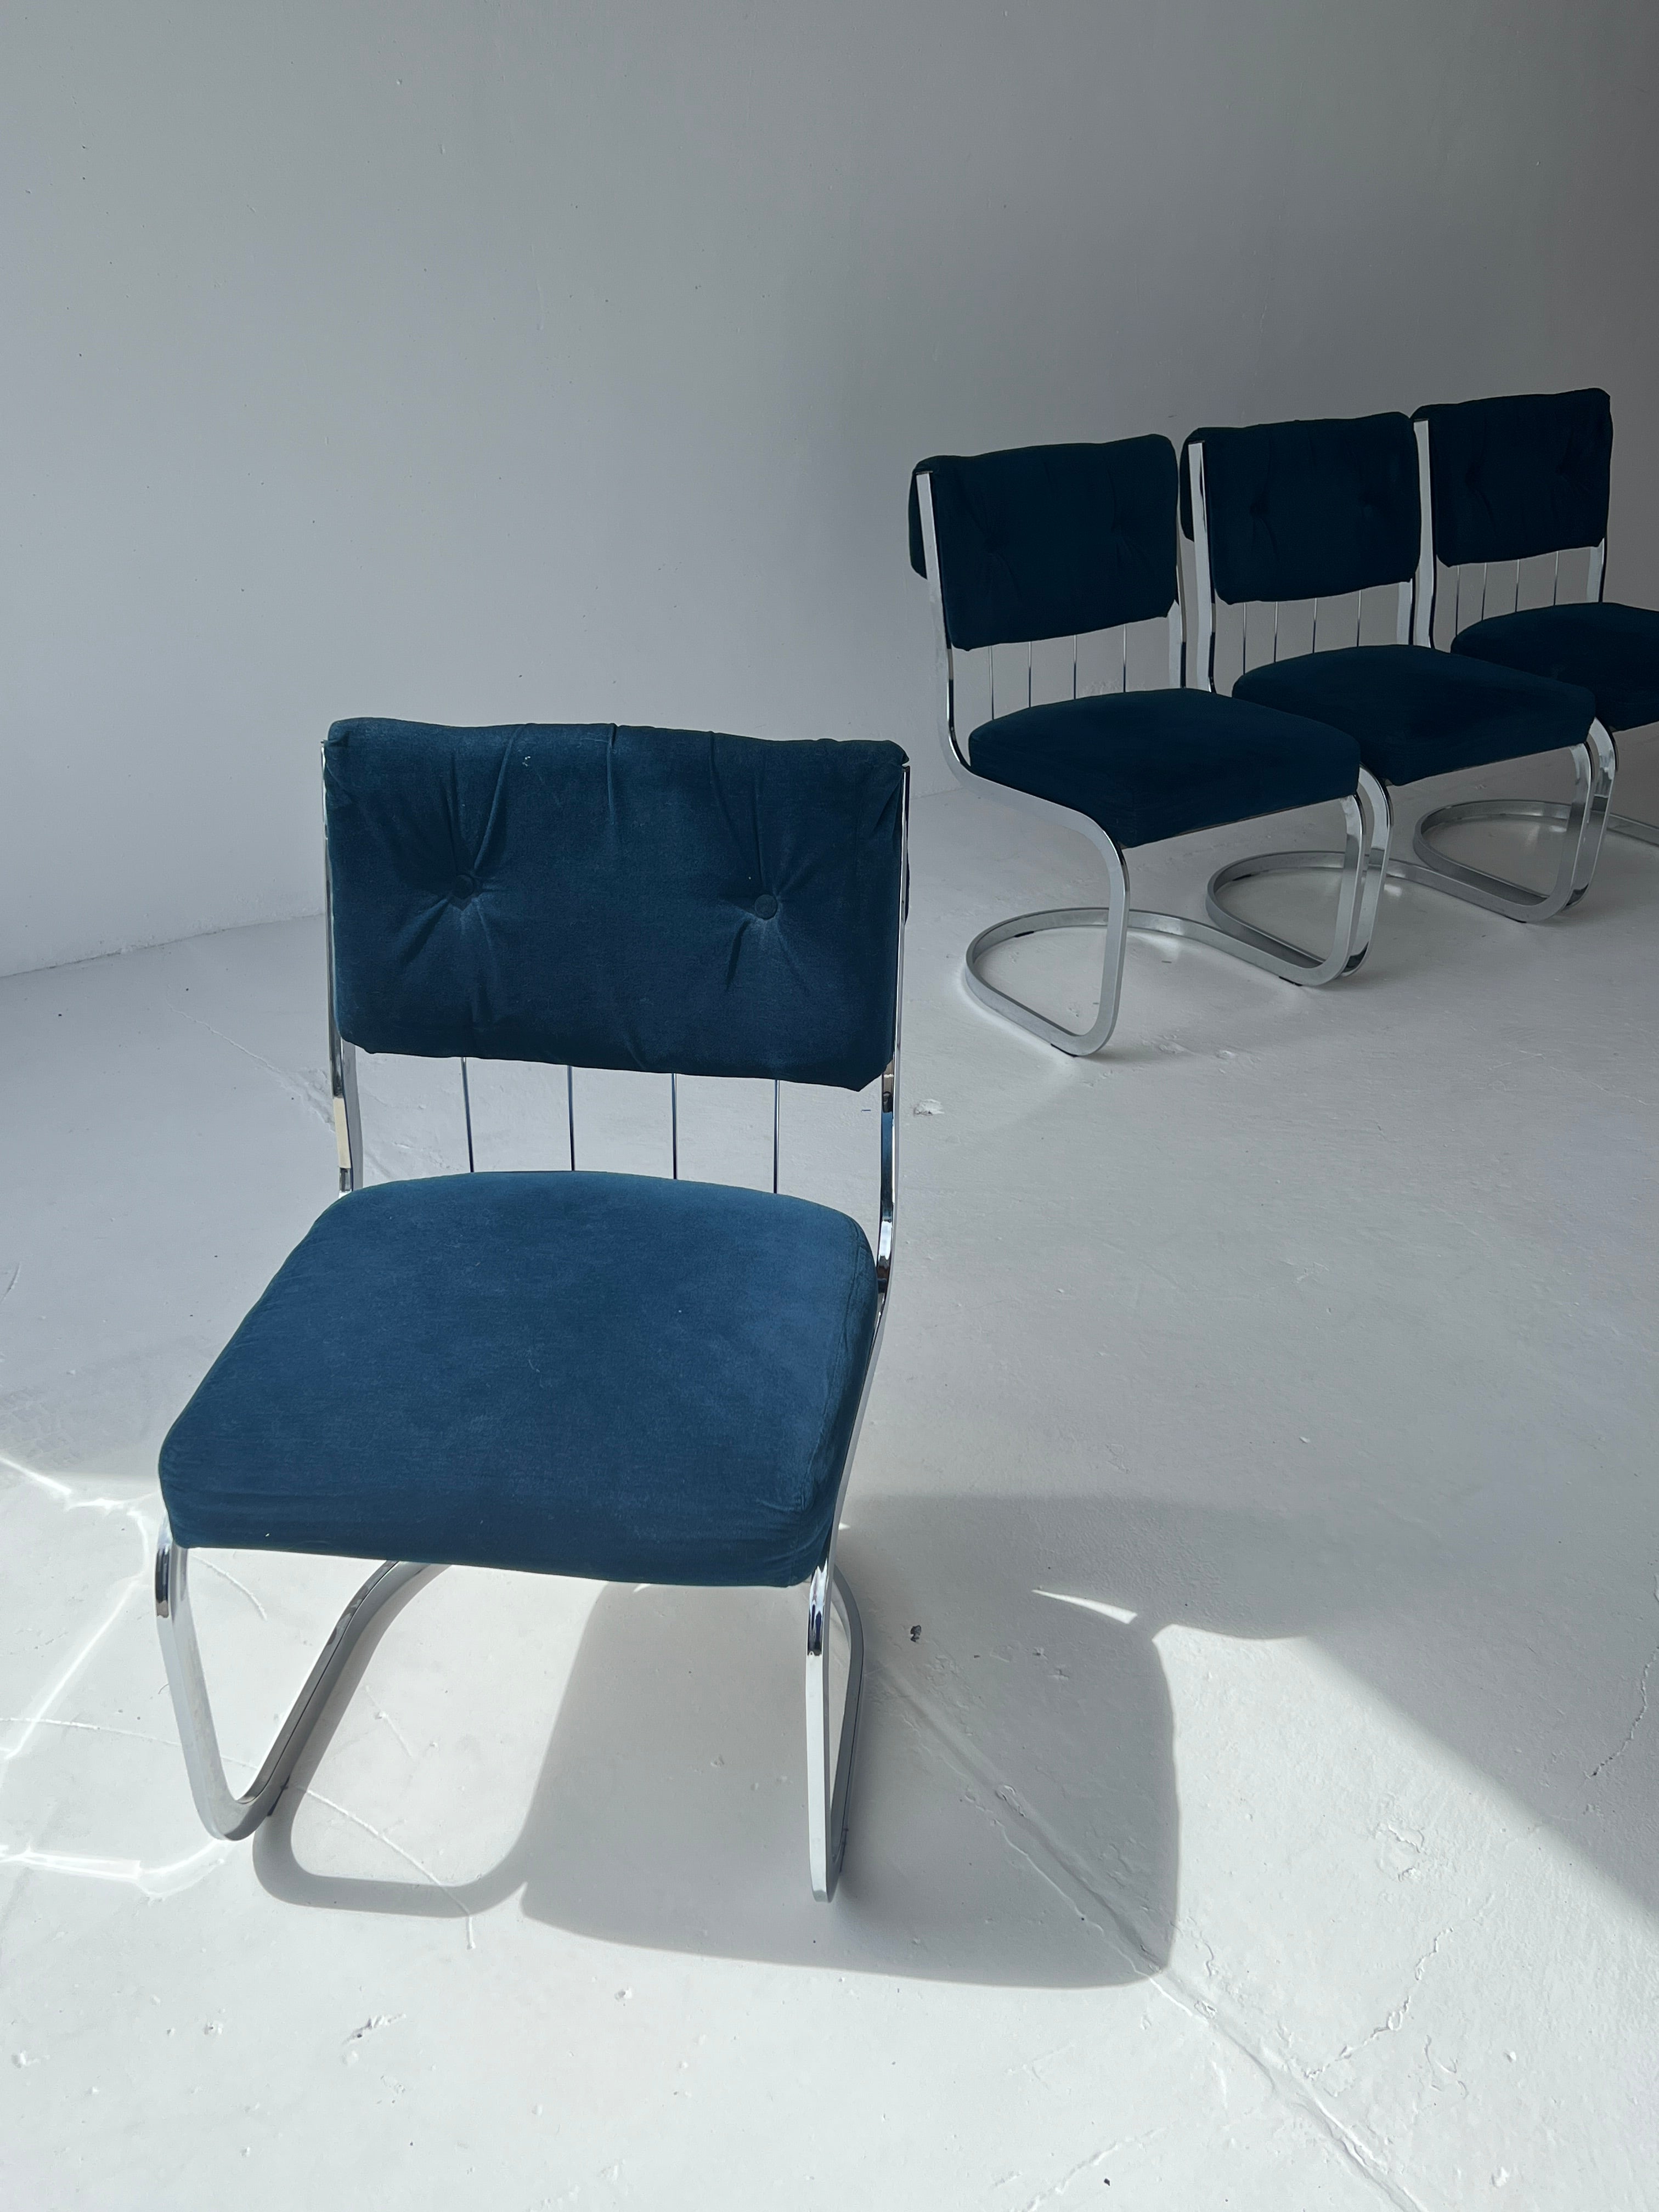 Cal-Style Cantilever Dining Chairs, 1987 (6 available)